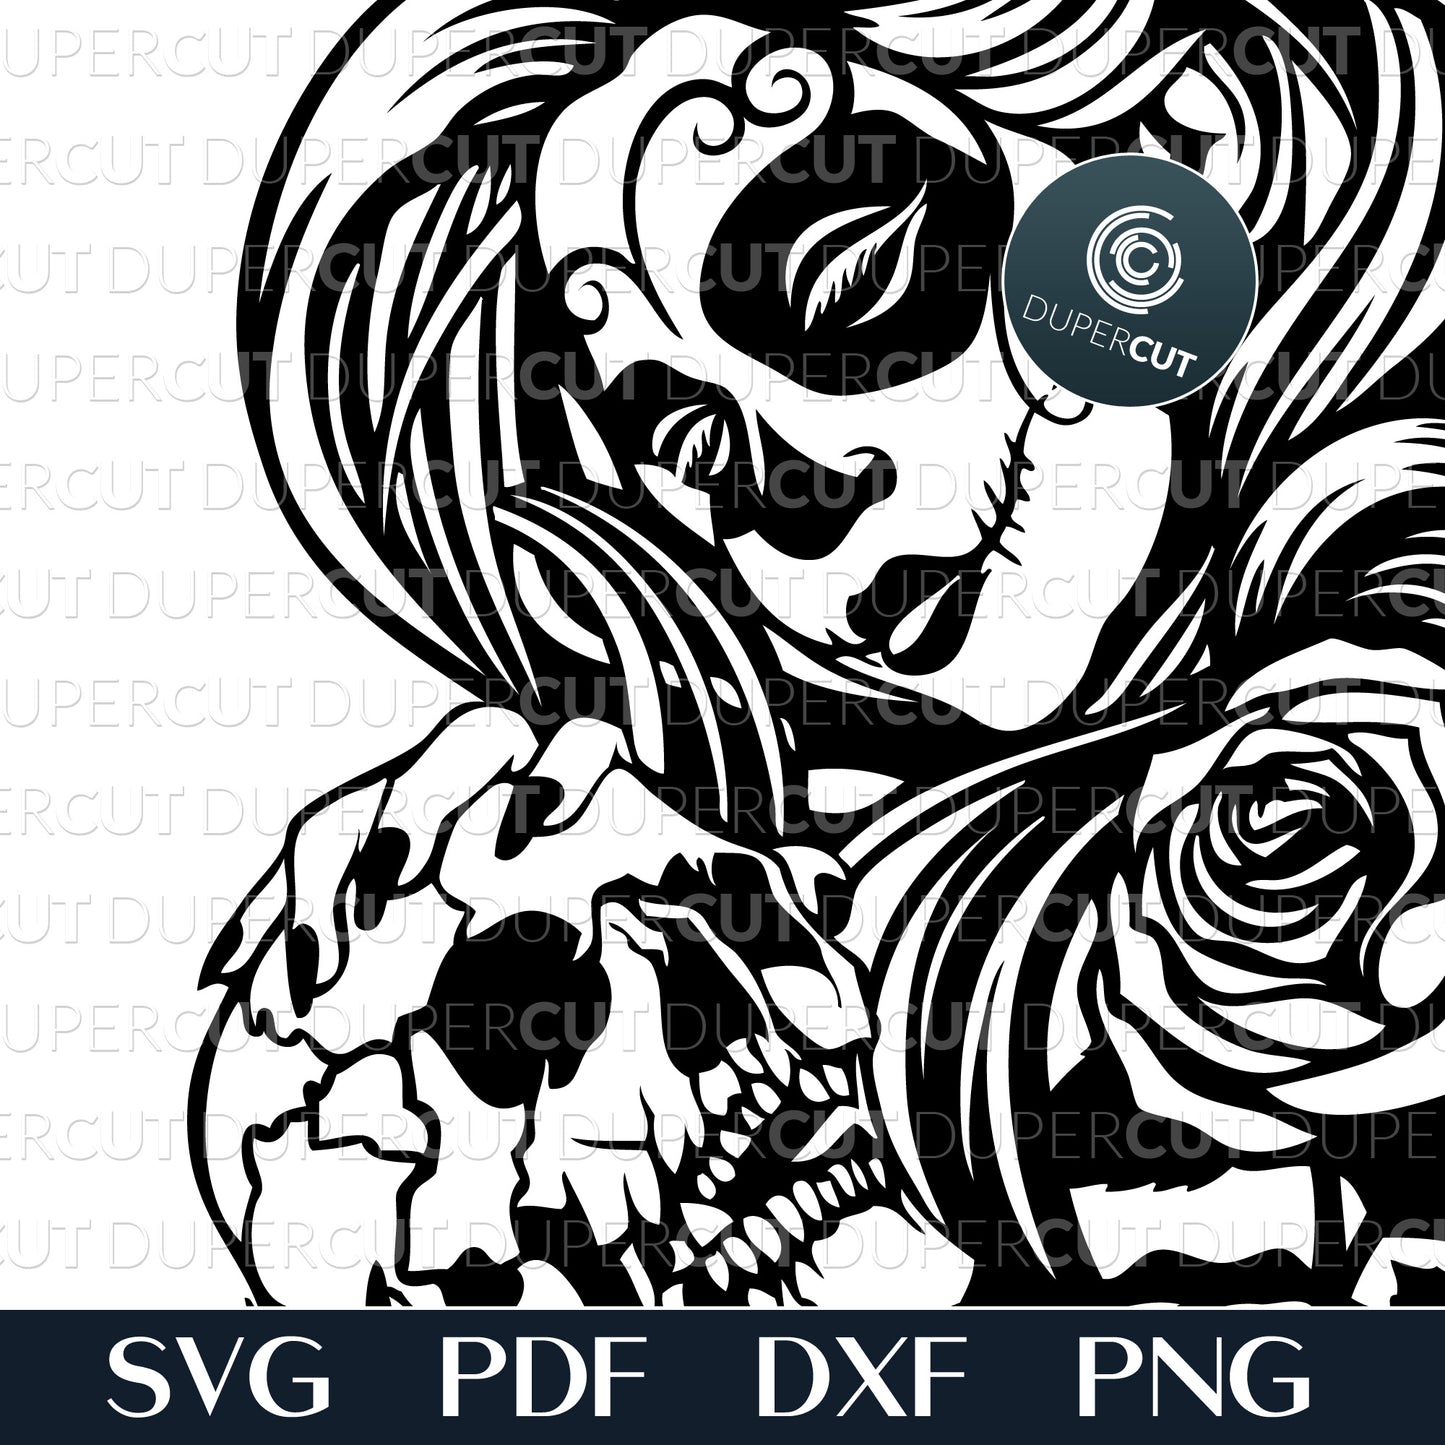 Day of the dead female sugar skull, steampunk tattoo line art - SVG DXF PNG files for cutting, engraving, sublimation. Great for Cricut, Silhouette Cameo, Glowforge.